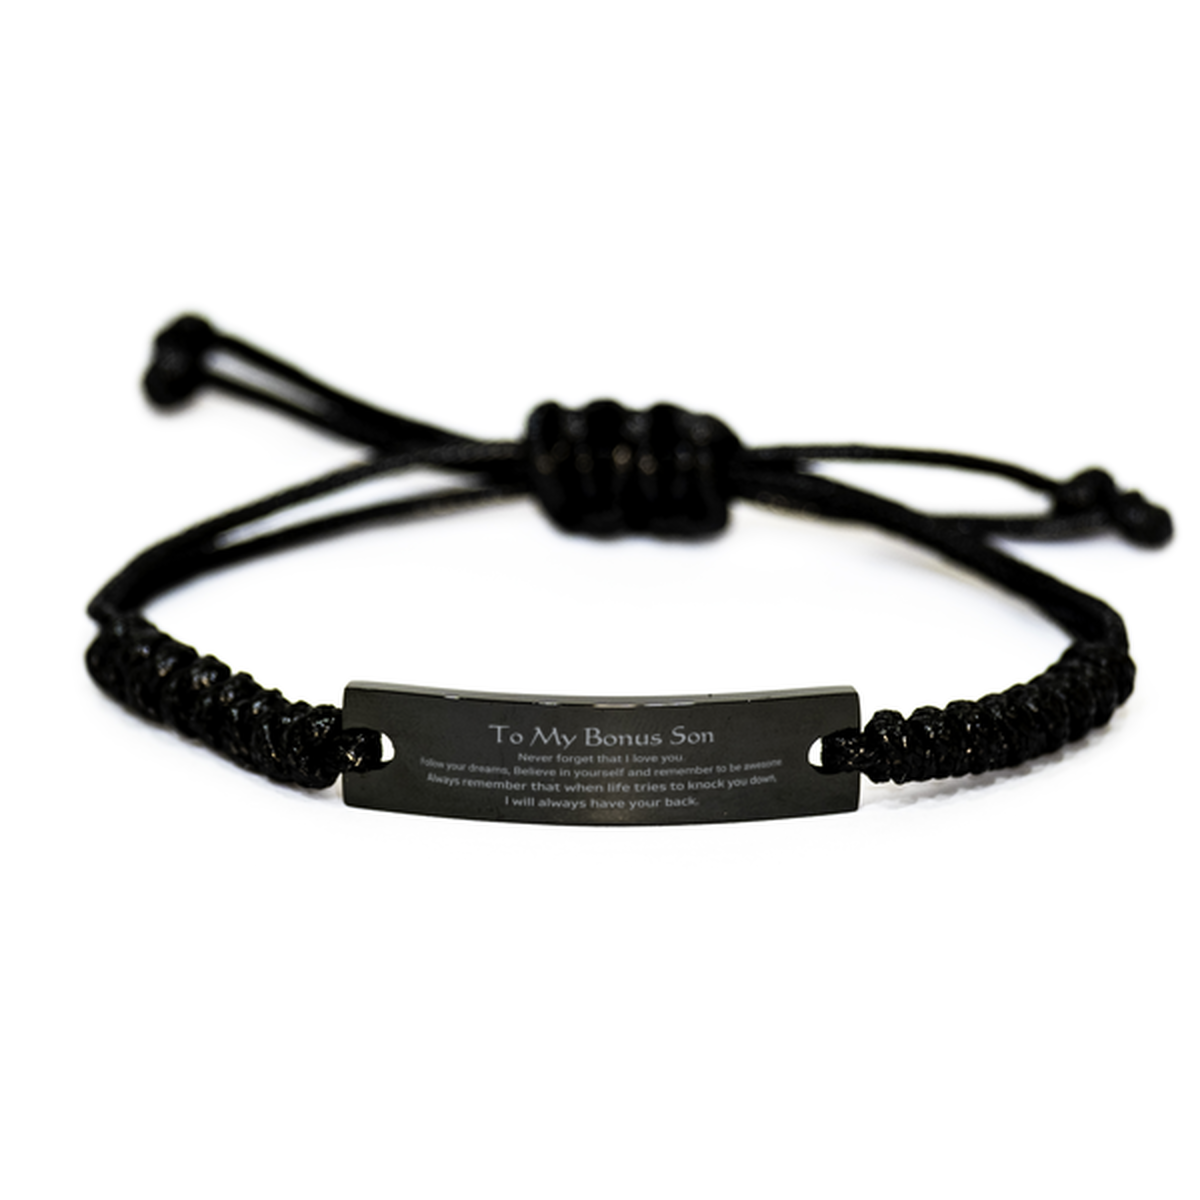 Inspirational Gifts for Bonus Son, Follow your dreams, Believe in yourself, Bonus Son Black Rope Bracelet, Birthday Christmas Unique Gifts For Bonus Son